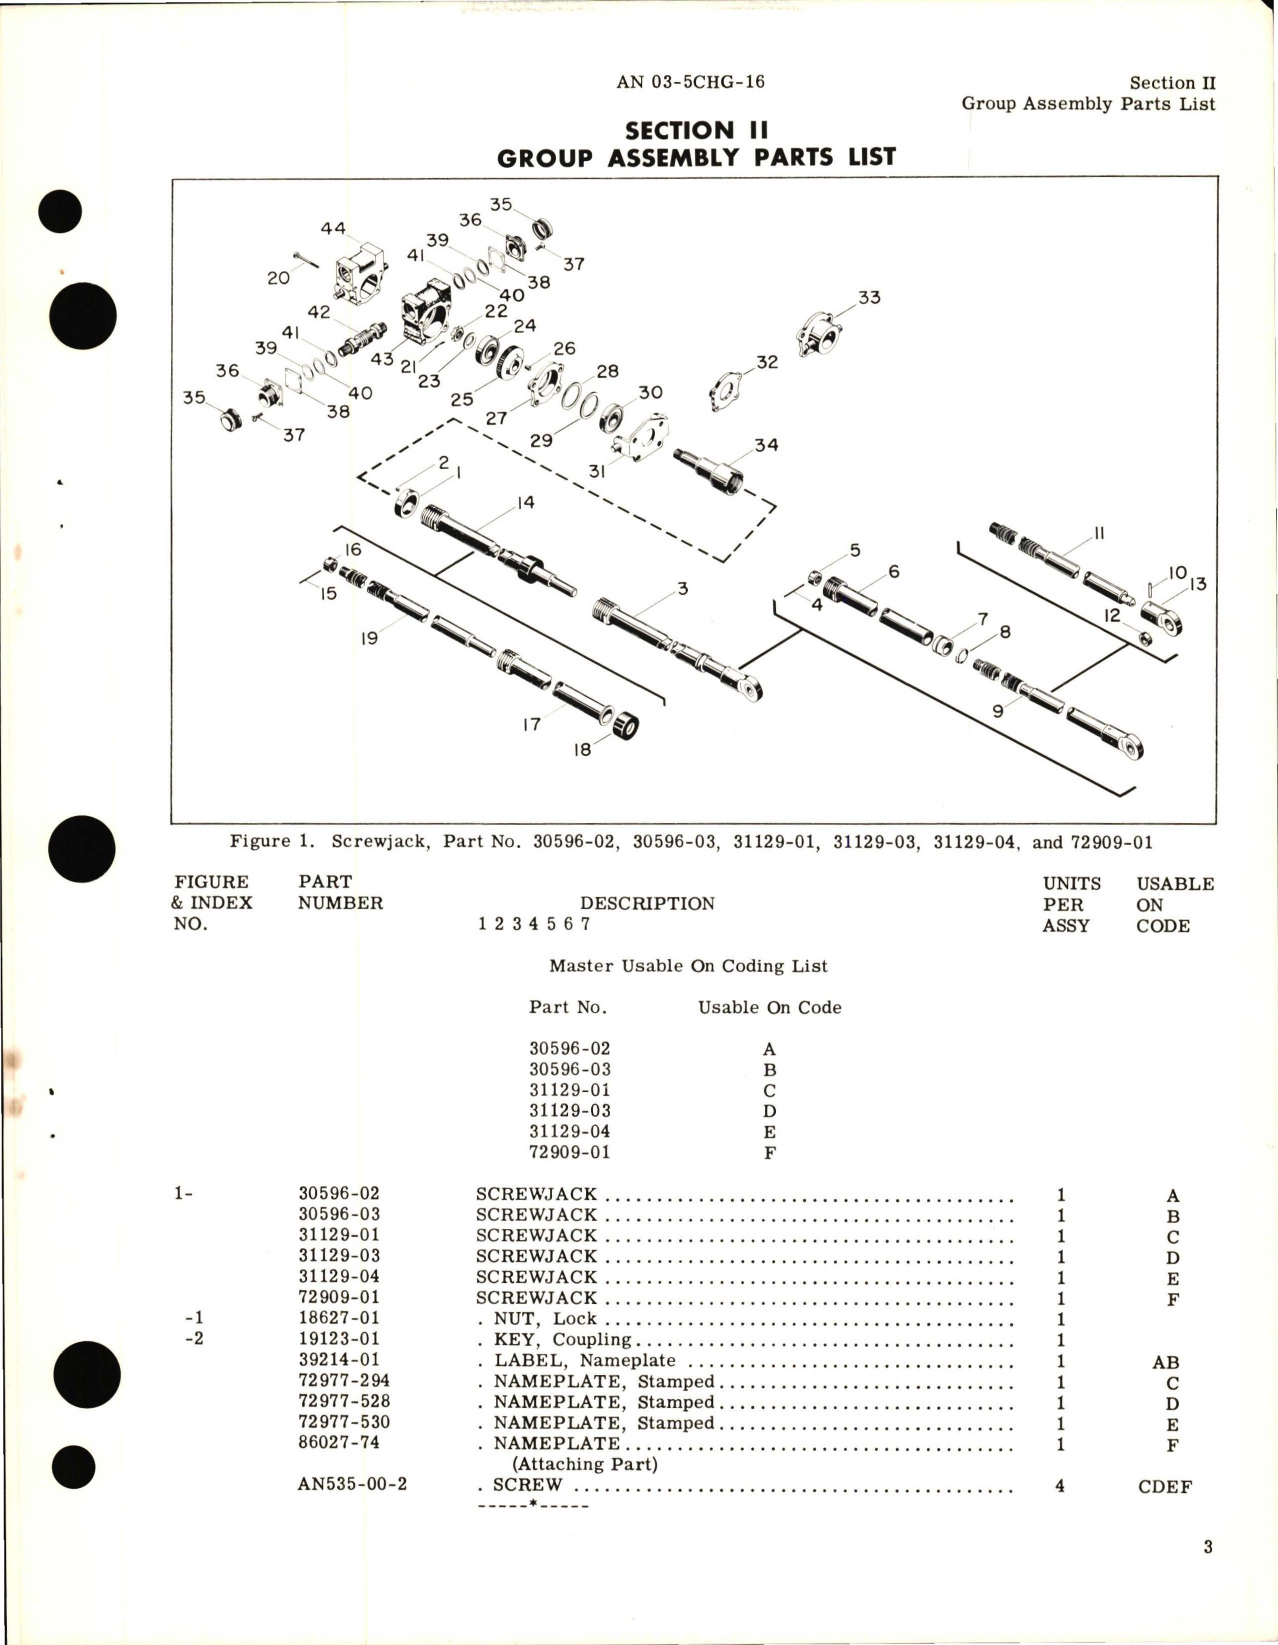 Sample page 5 from AirCorps Library document: Illustrated Parts Breakdown for Screwjack, Parts 30596-02, 30596-03, 31129-01, 31129-03, 31129-04, and 72909-01